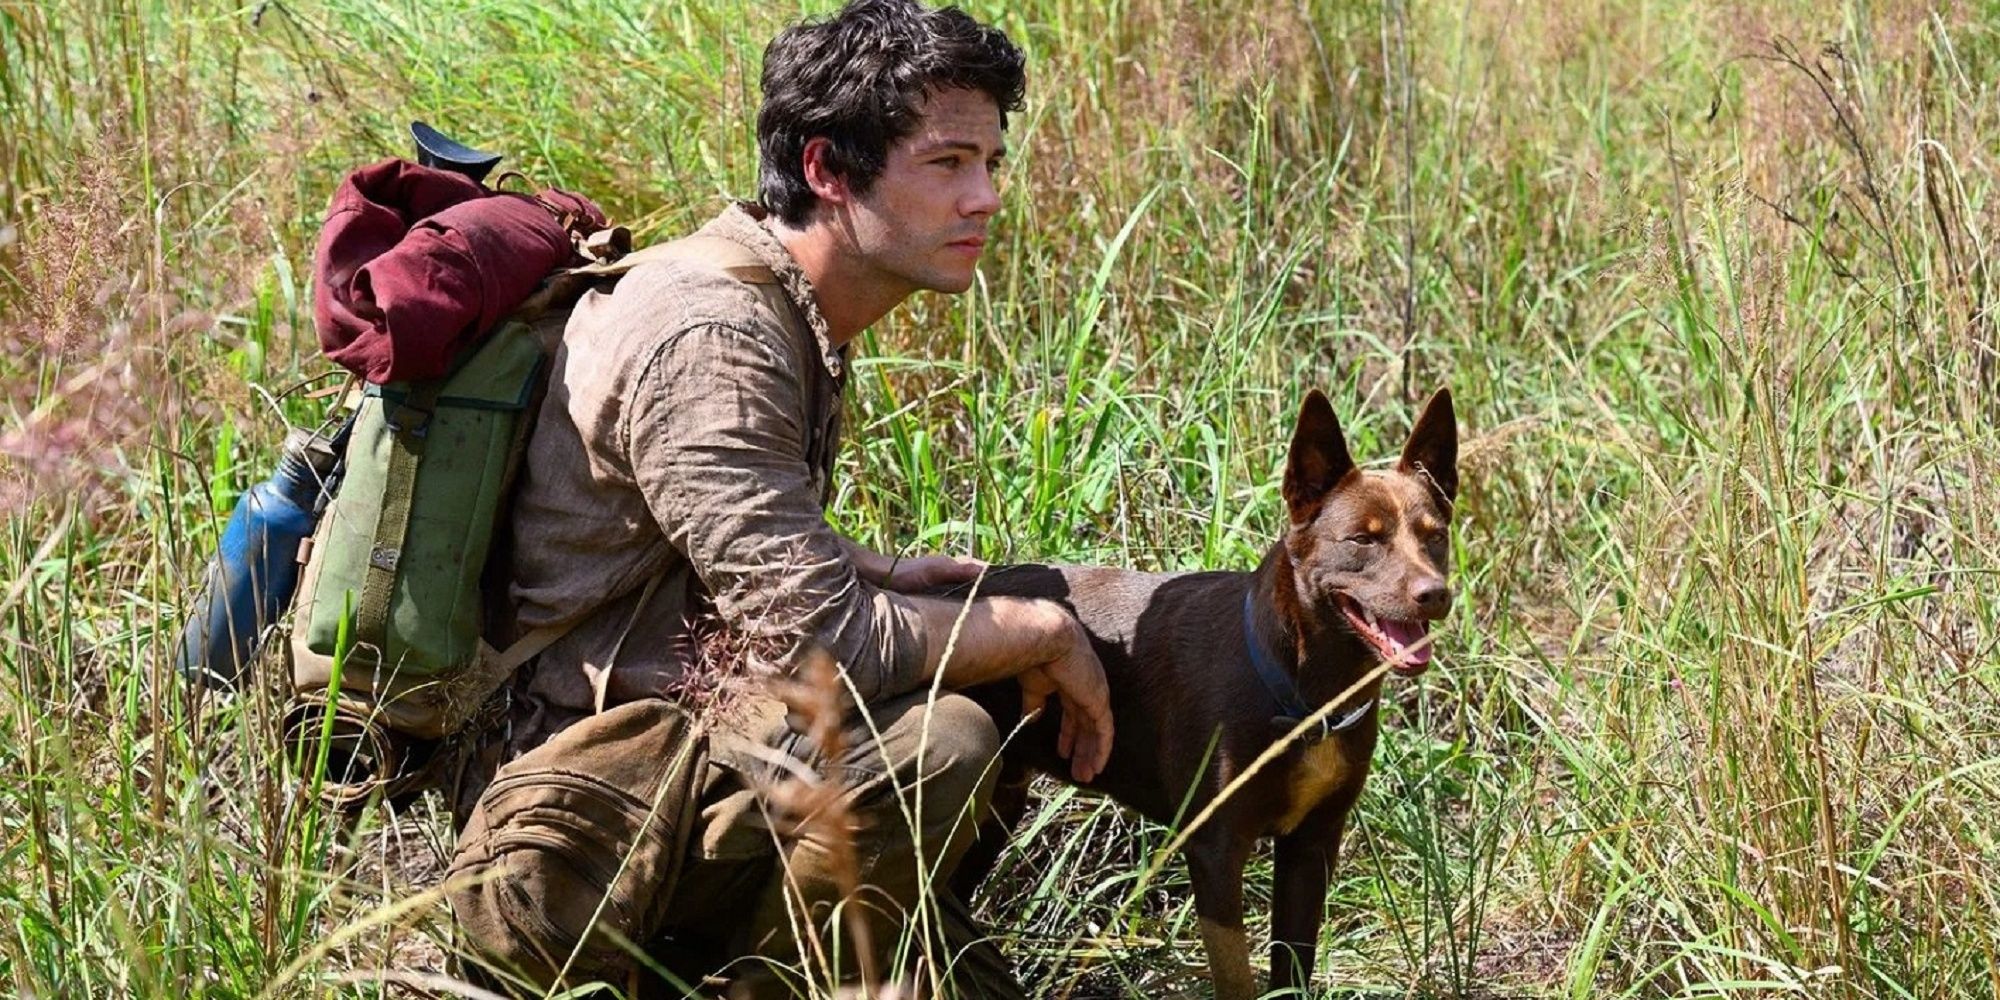 Joel and Boy together in a grass field in 'Love and Monsters.'